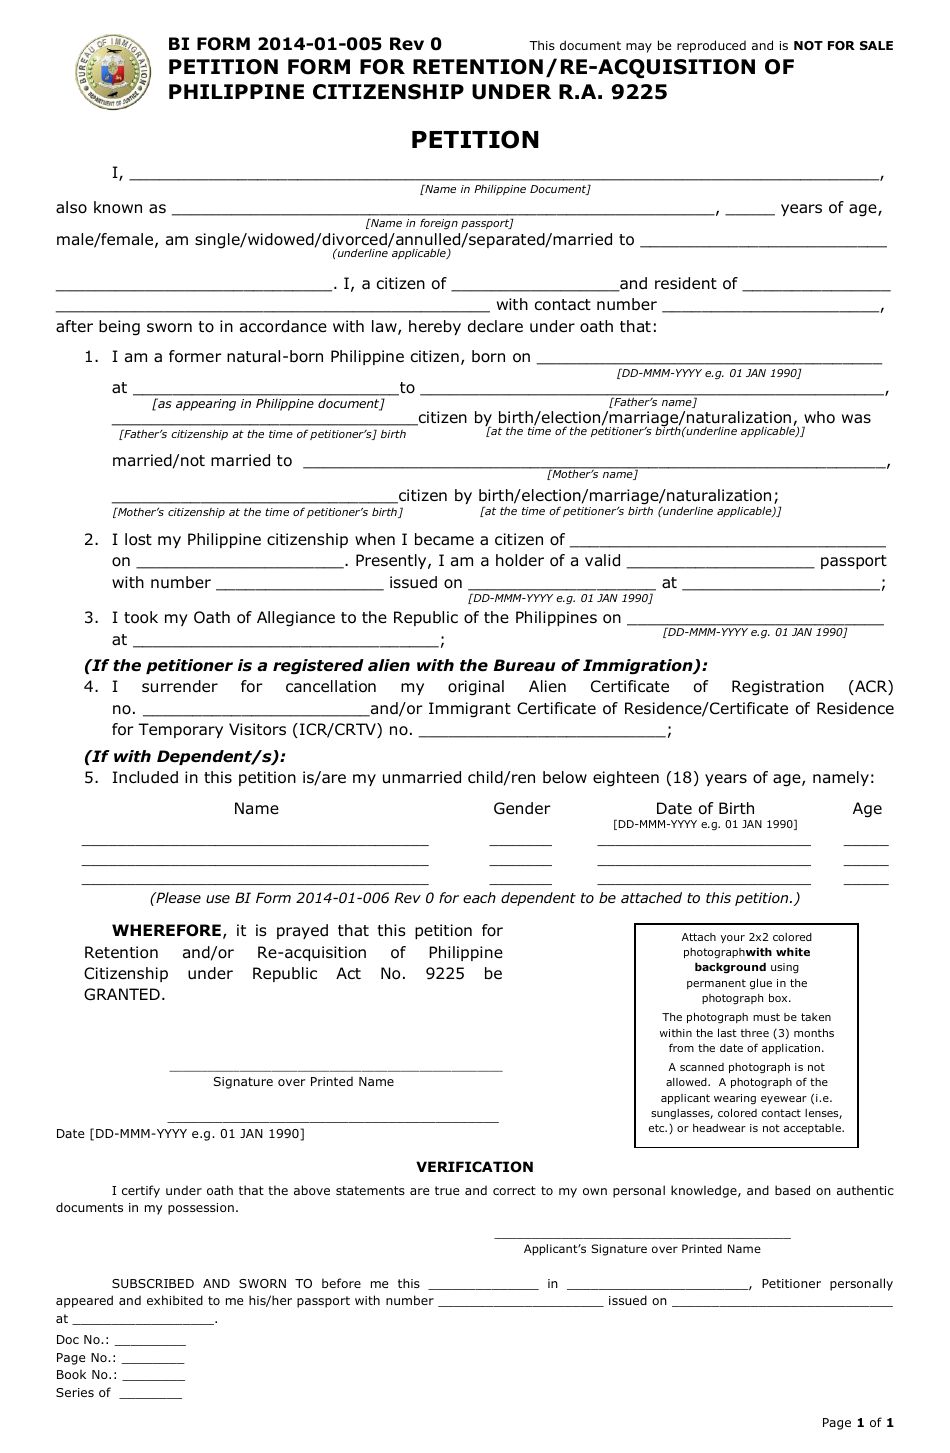 BI Form 2014-01-005 Petition Form for Retention/Re-acquisition of Philippine Citizenship Under R.a. 9225 - Philippines, Page 1